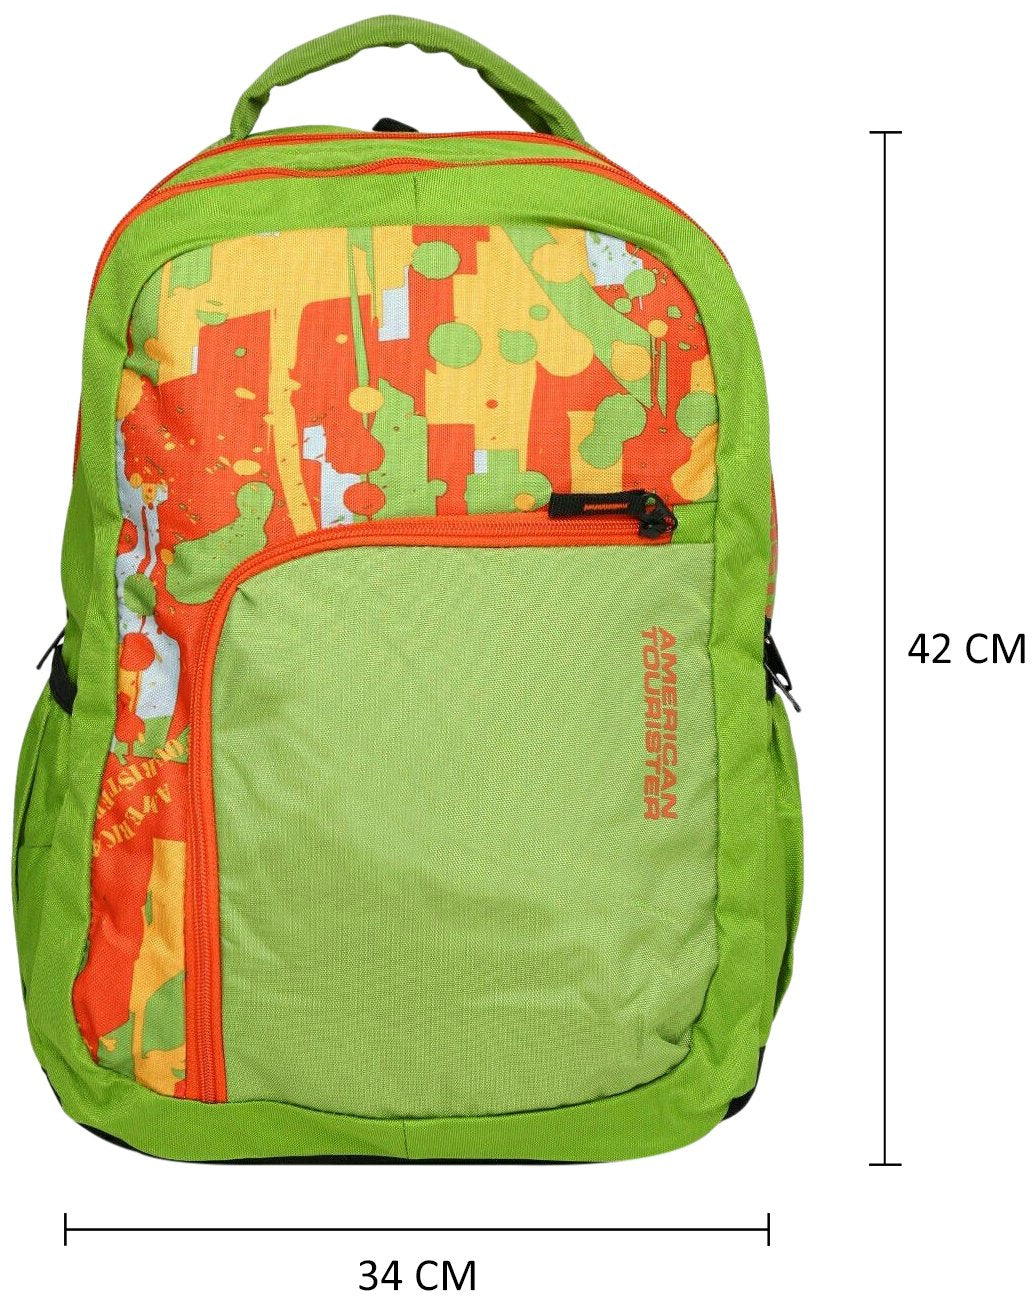 American Tourister Green Casual Backpack (Code 04 Lime)